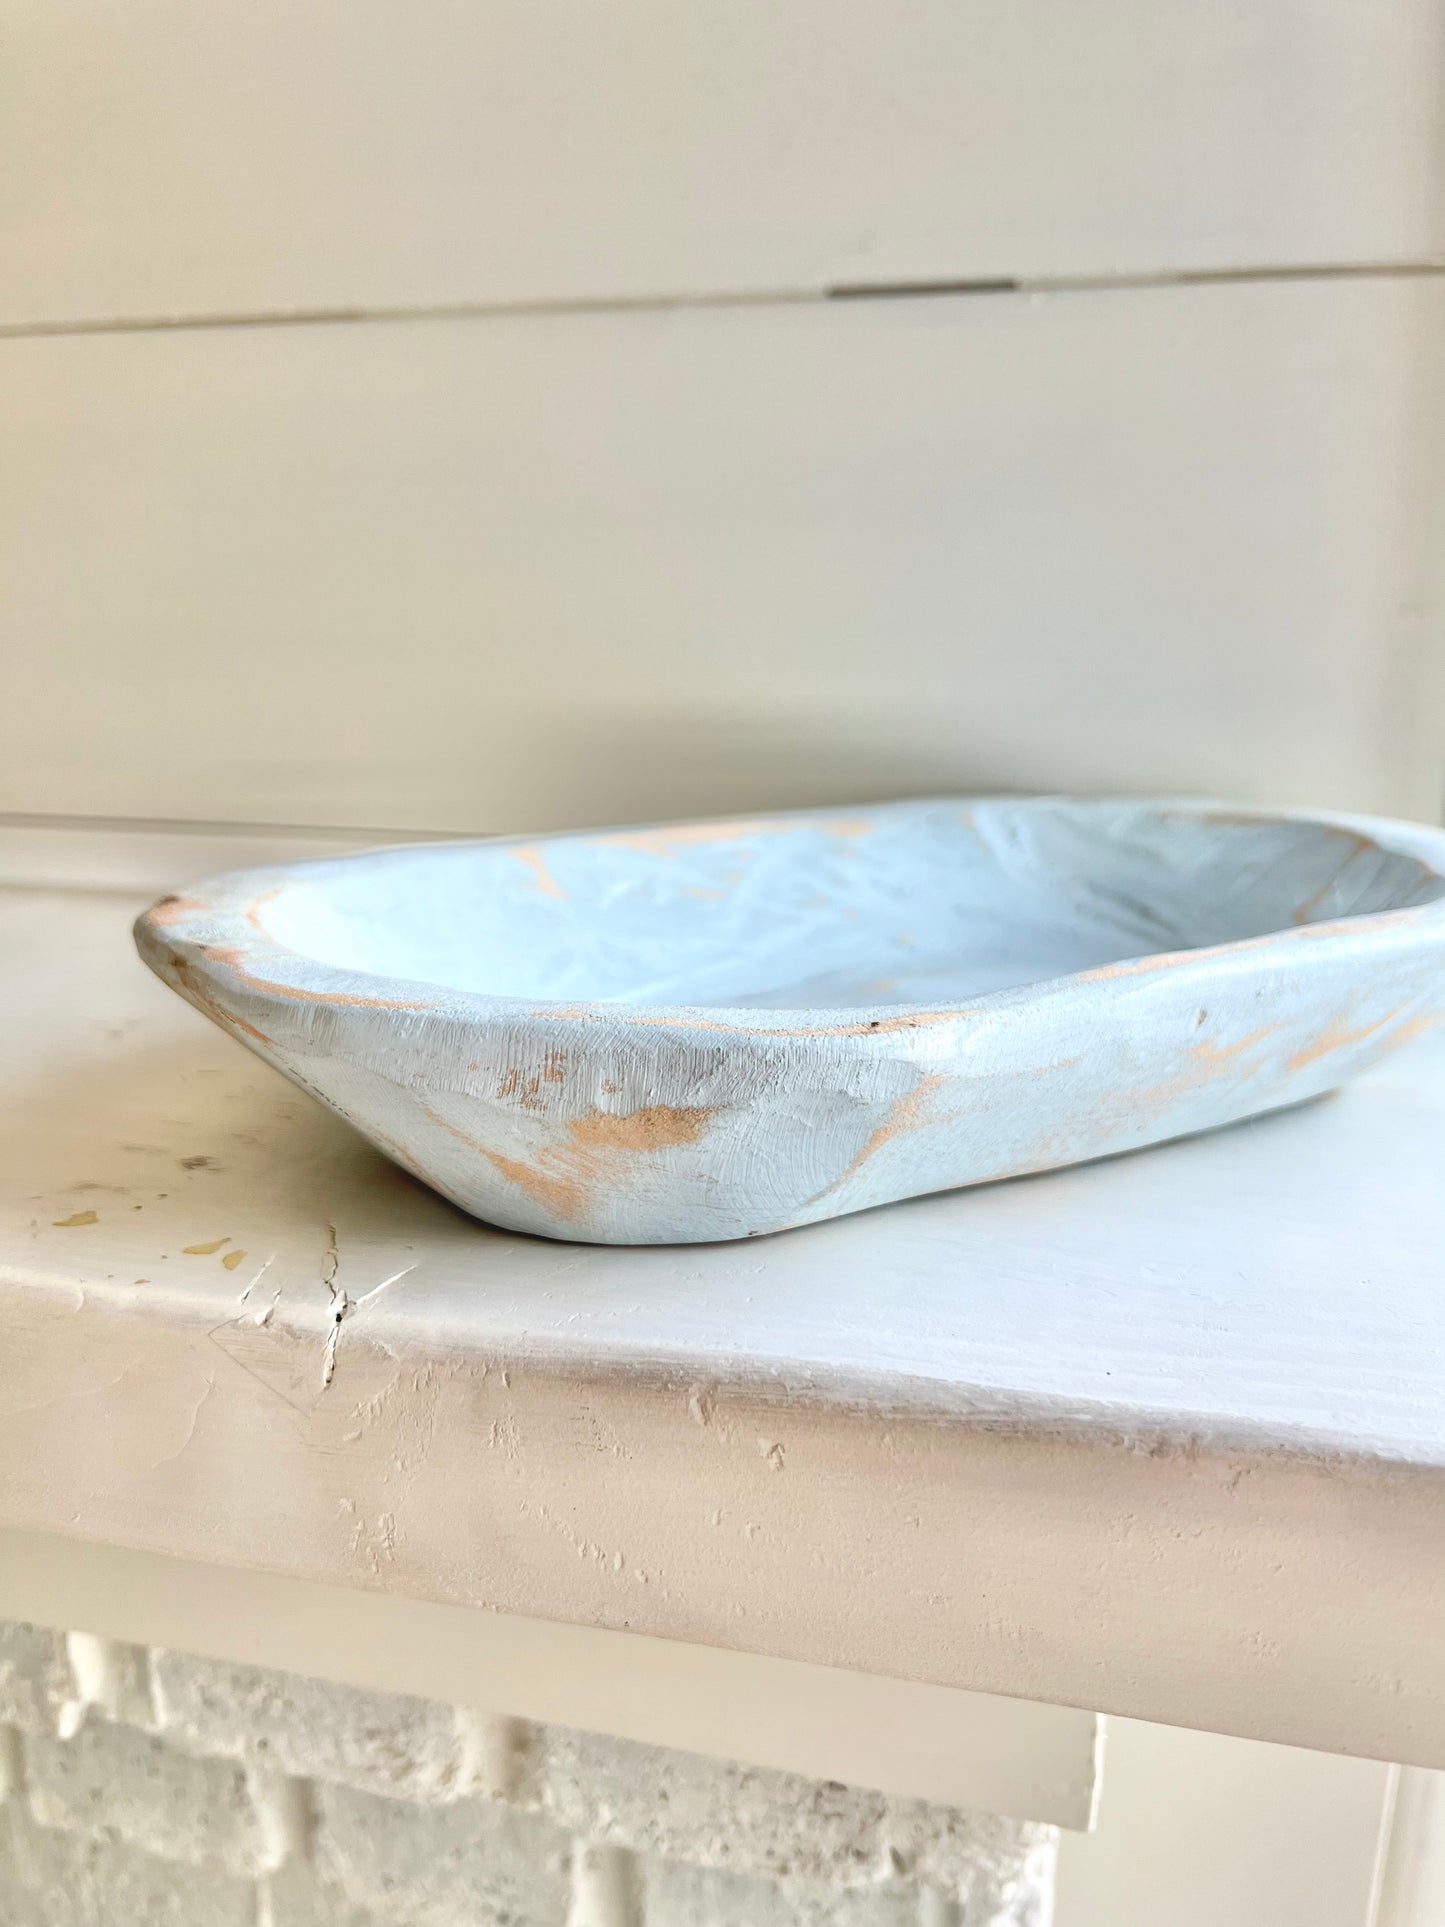 Pastel blue or gray small wooden dough bowl